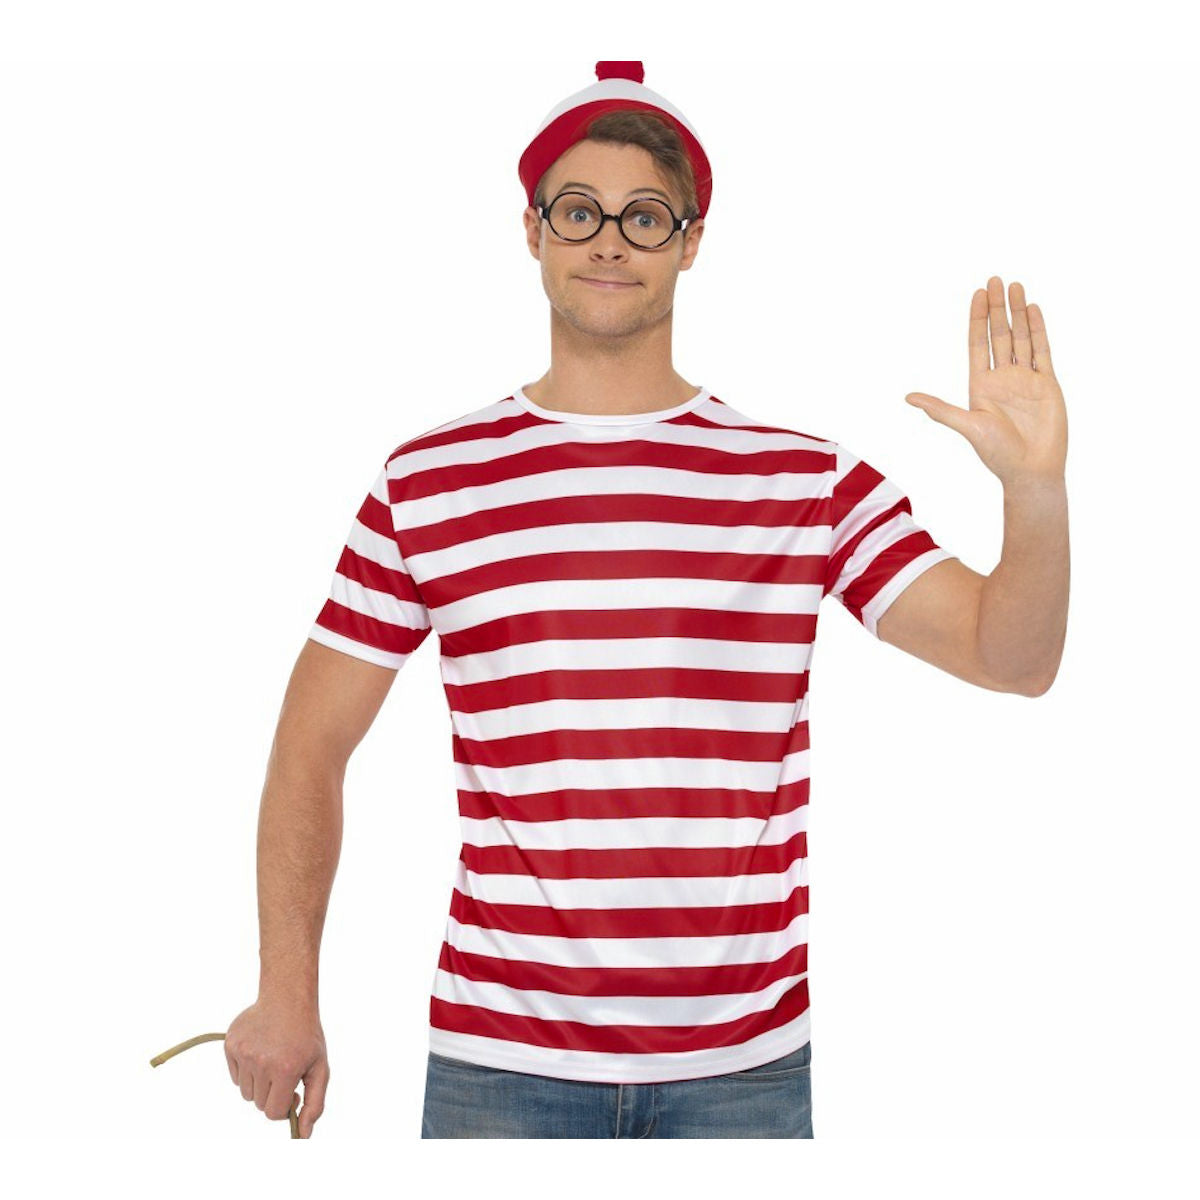 Where's Wally Instant Kit Costume with Red & White Top, Hat,  and Glasses